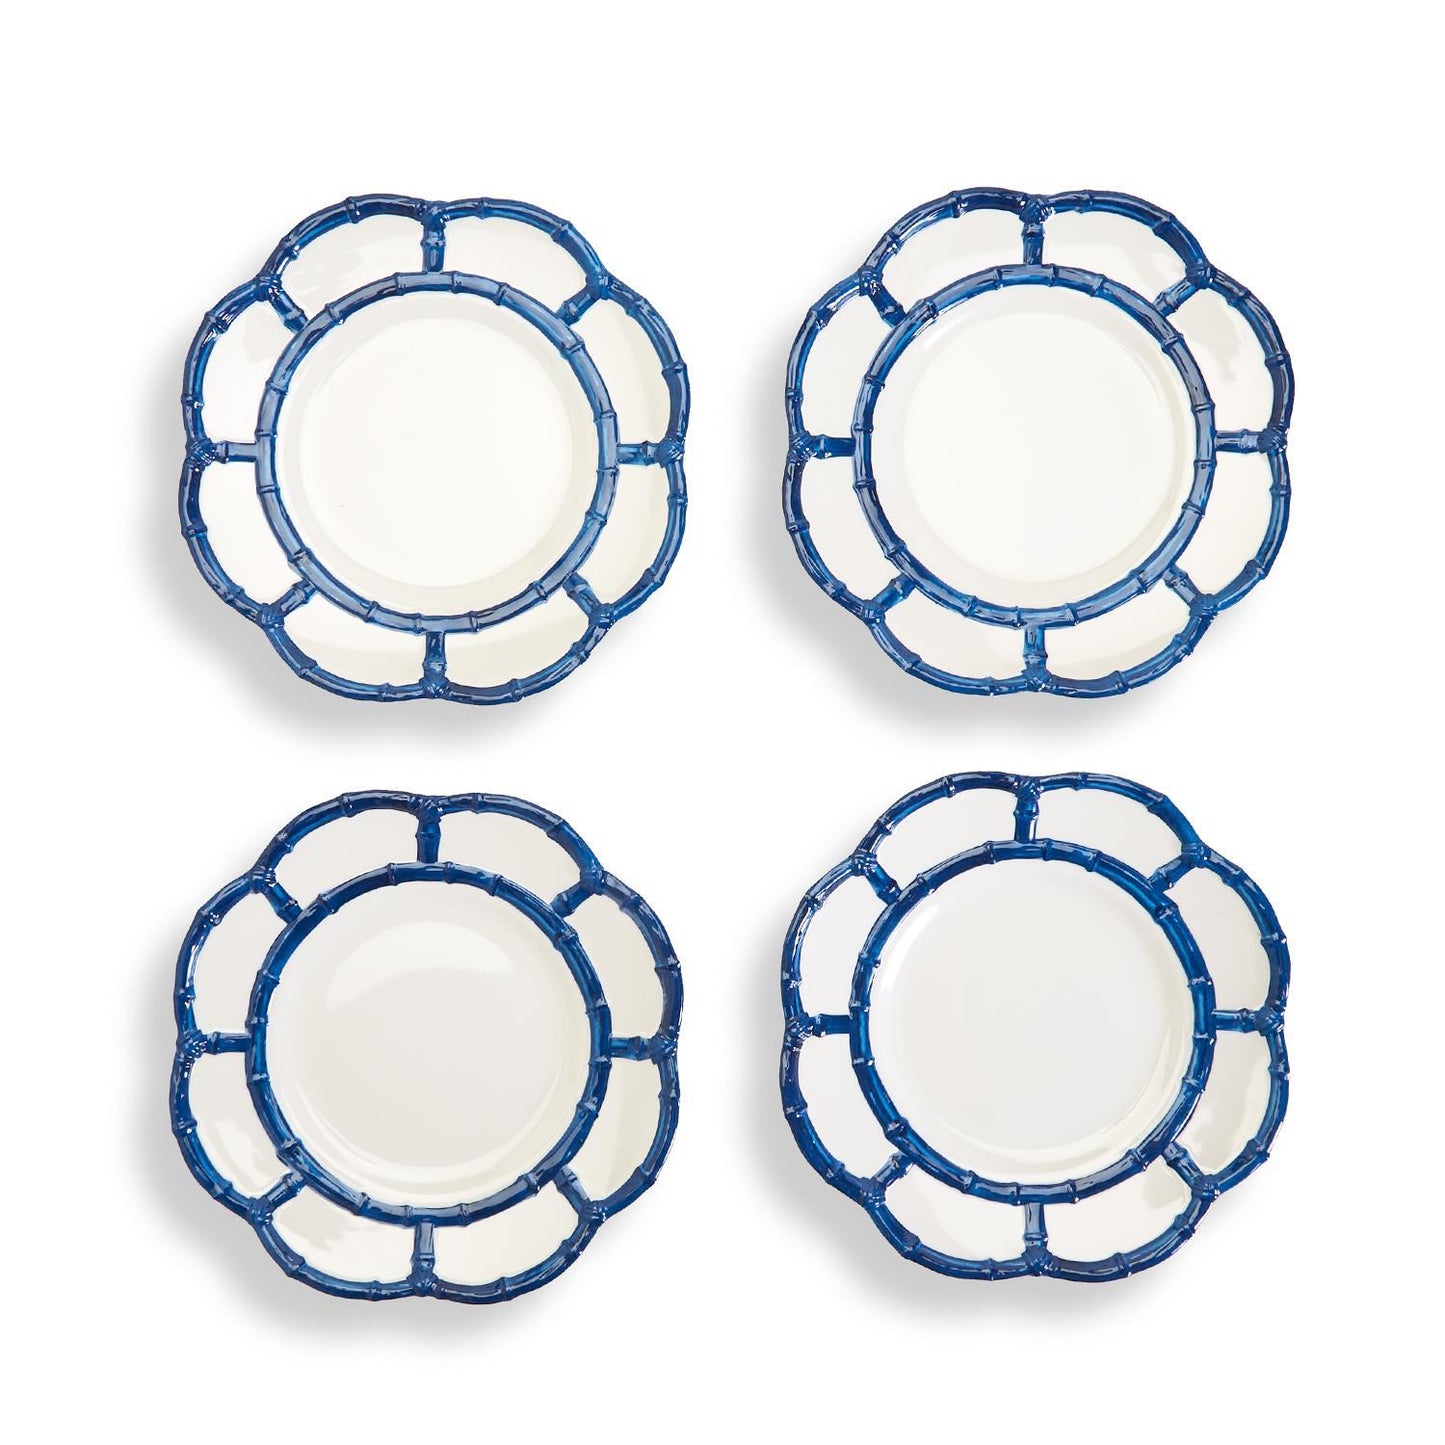 Blue Bamboo Salad/Dessert Plates with Bamboo Rim, Set of 4 - fairley fancy